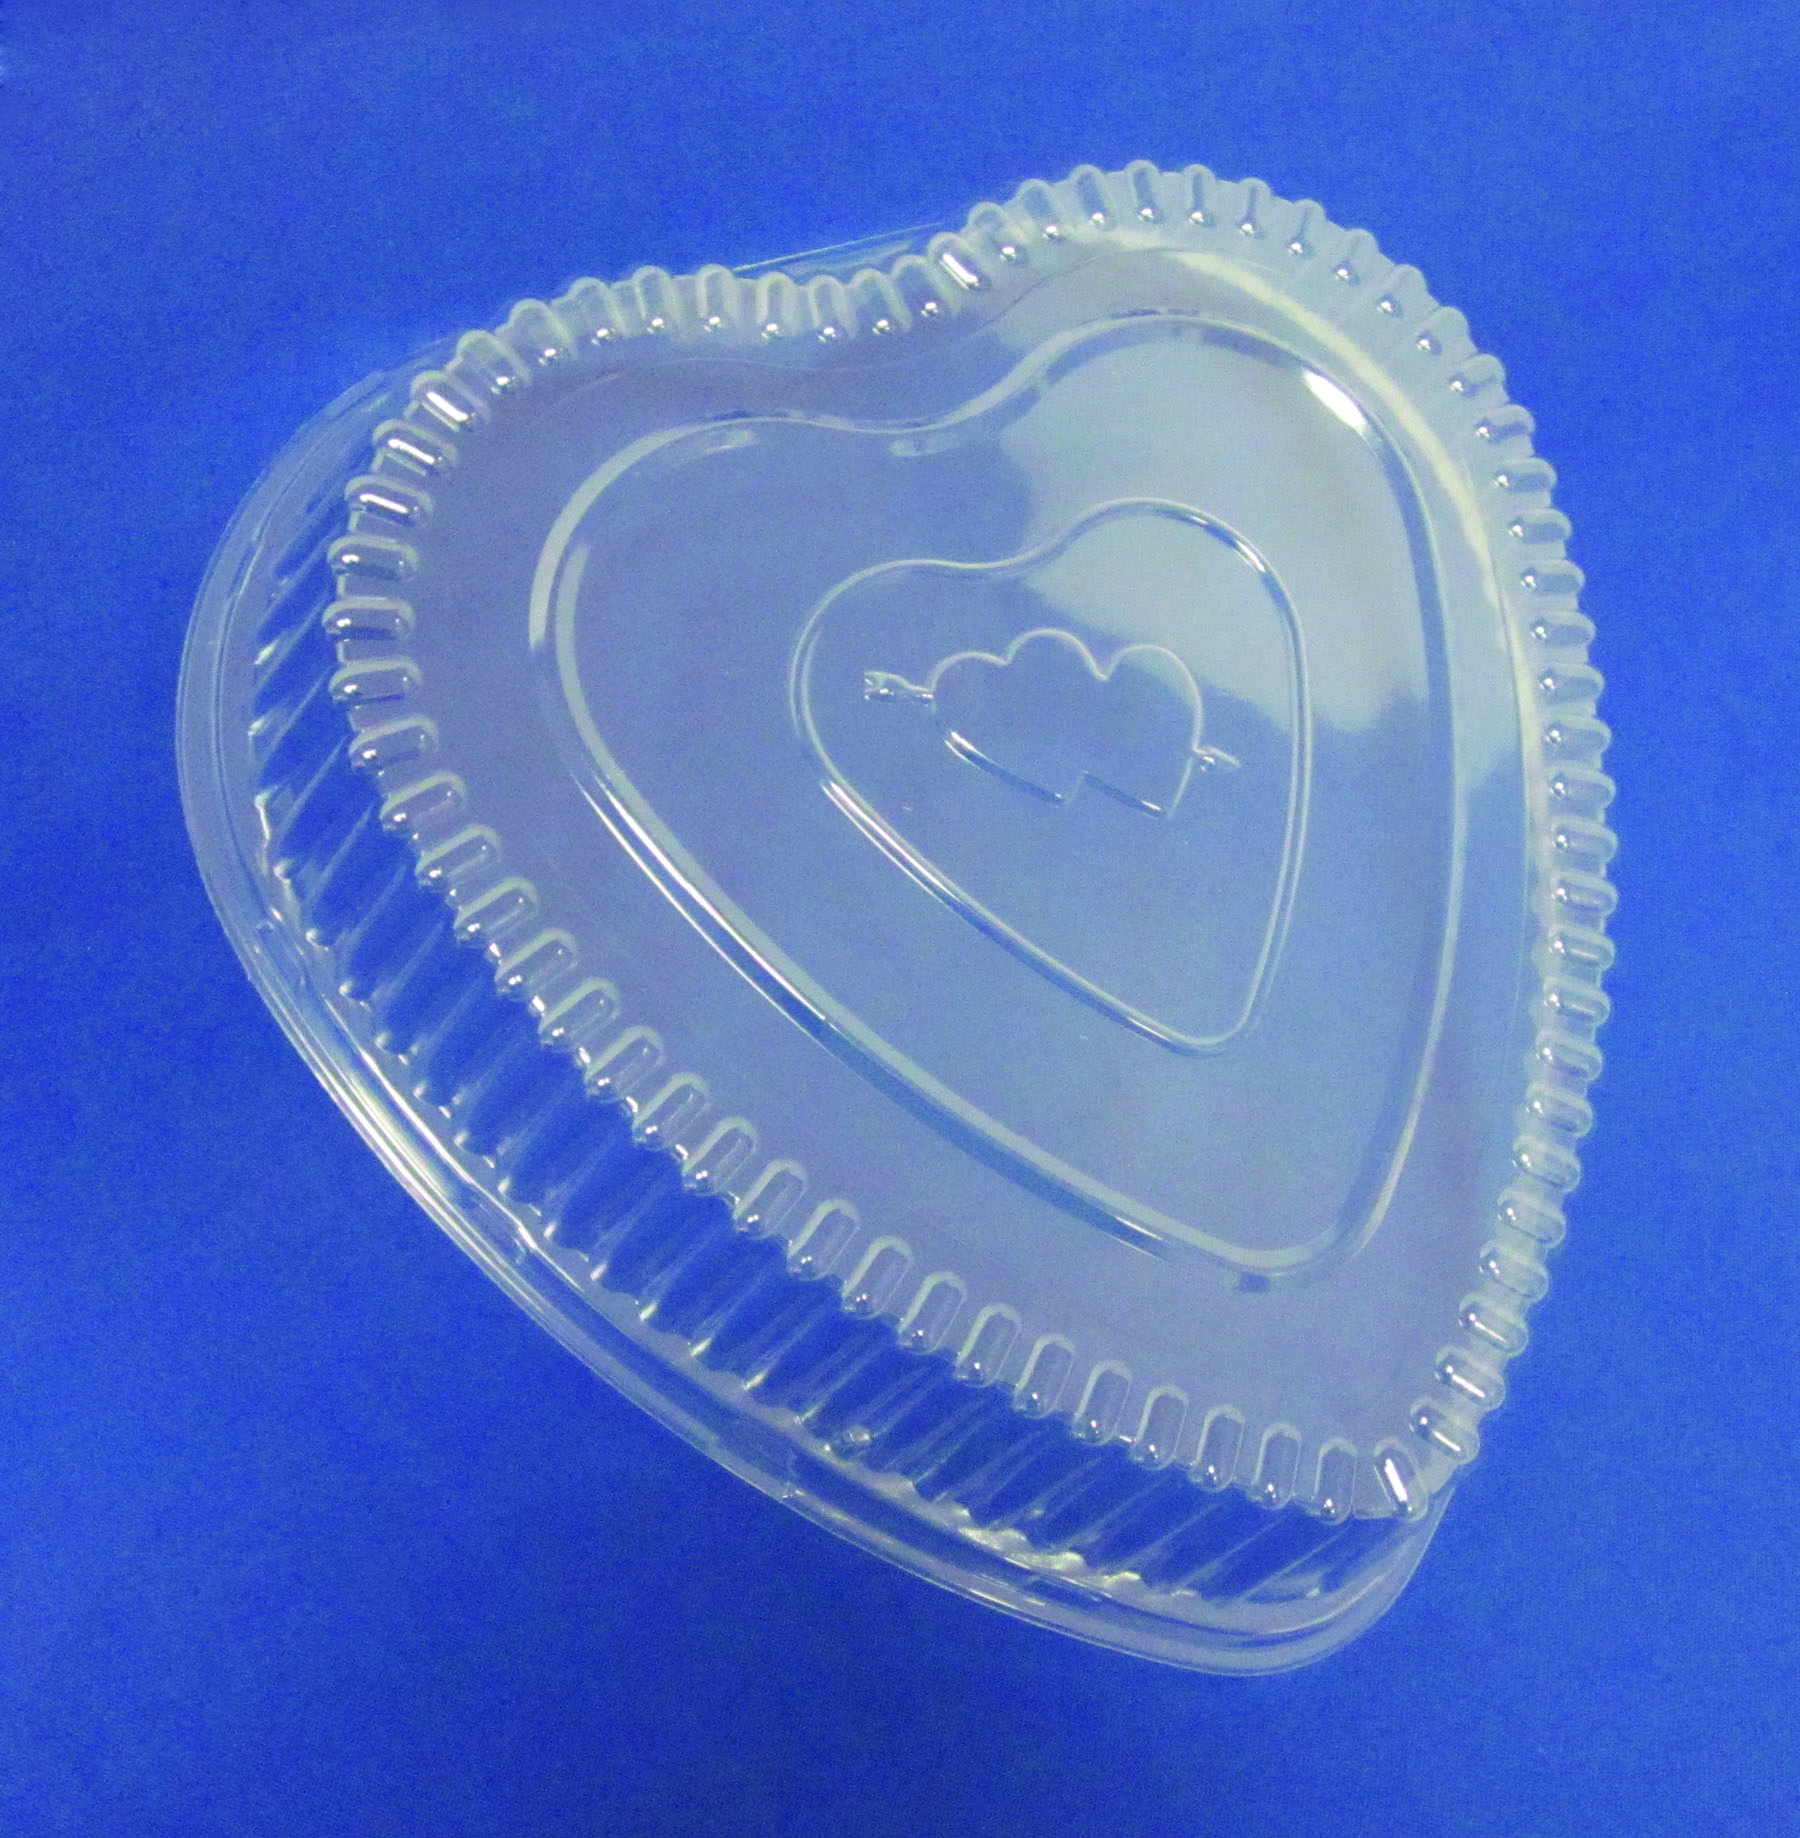 Durable Packaging P4700-250 Clear Dome Lid for 13 x 9 Foil Cake Pan -  25/Pack